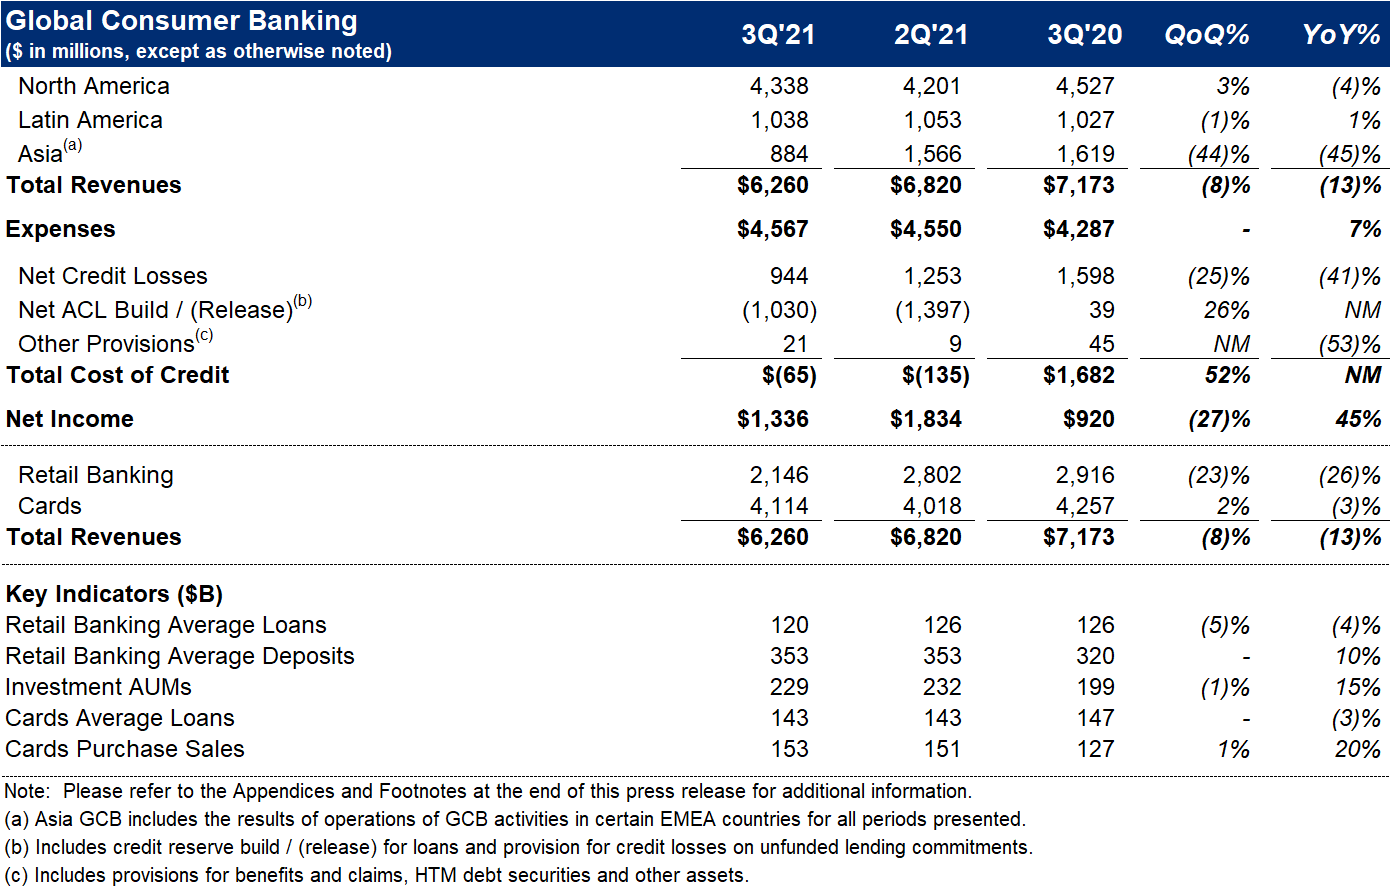 See Global Consumer Banking Results